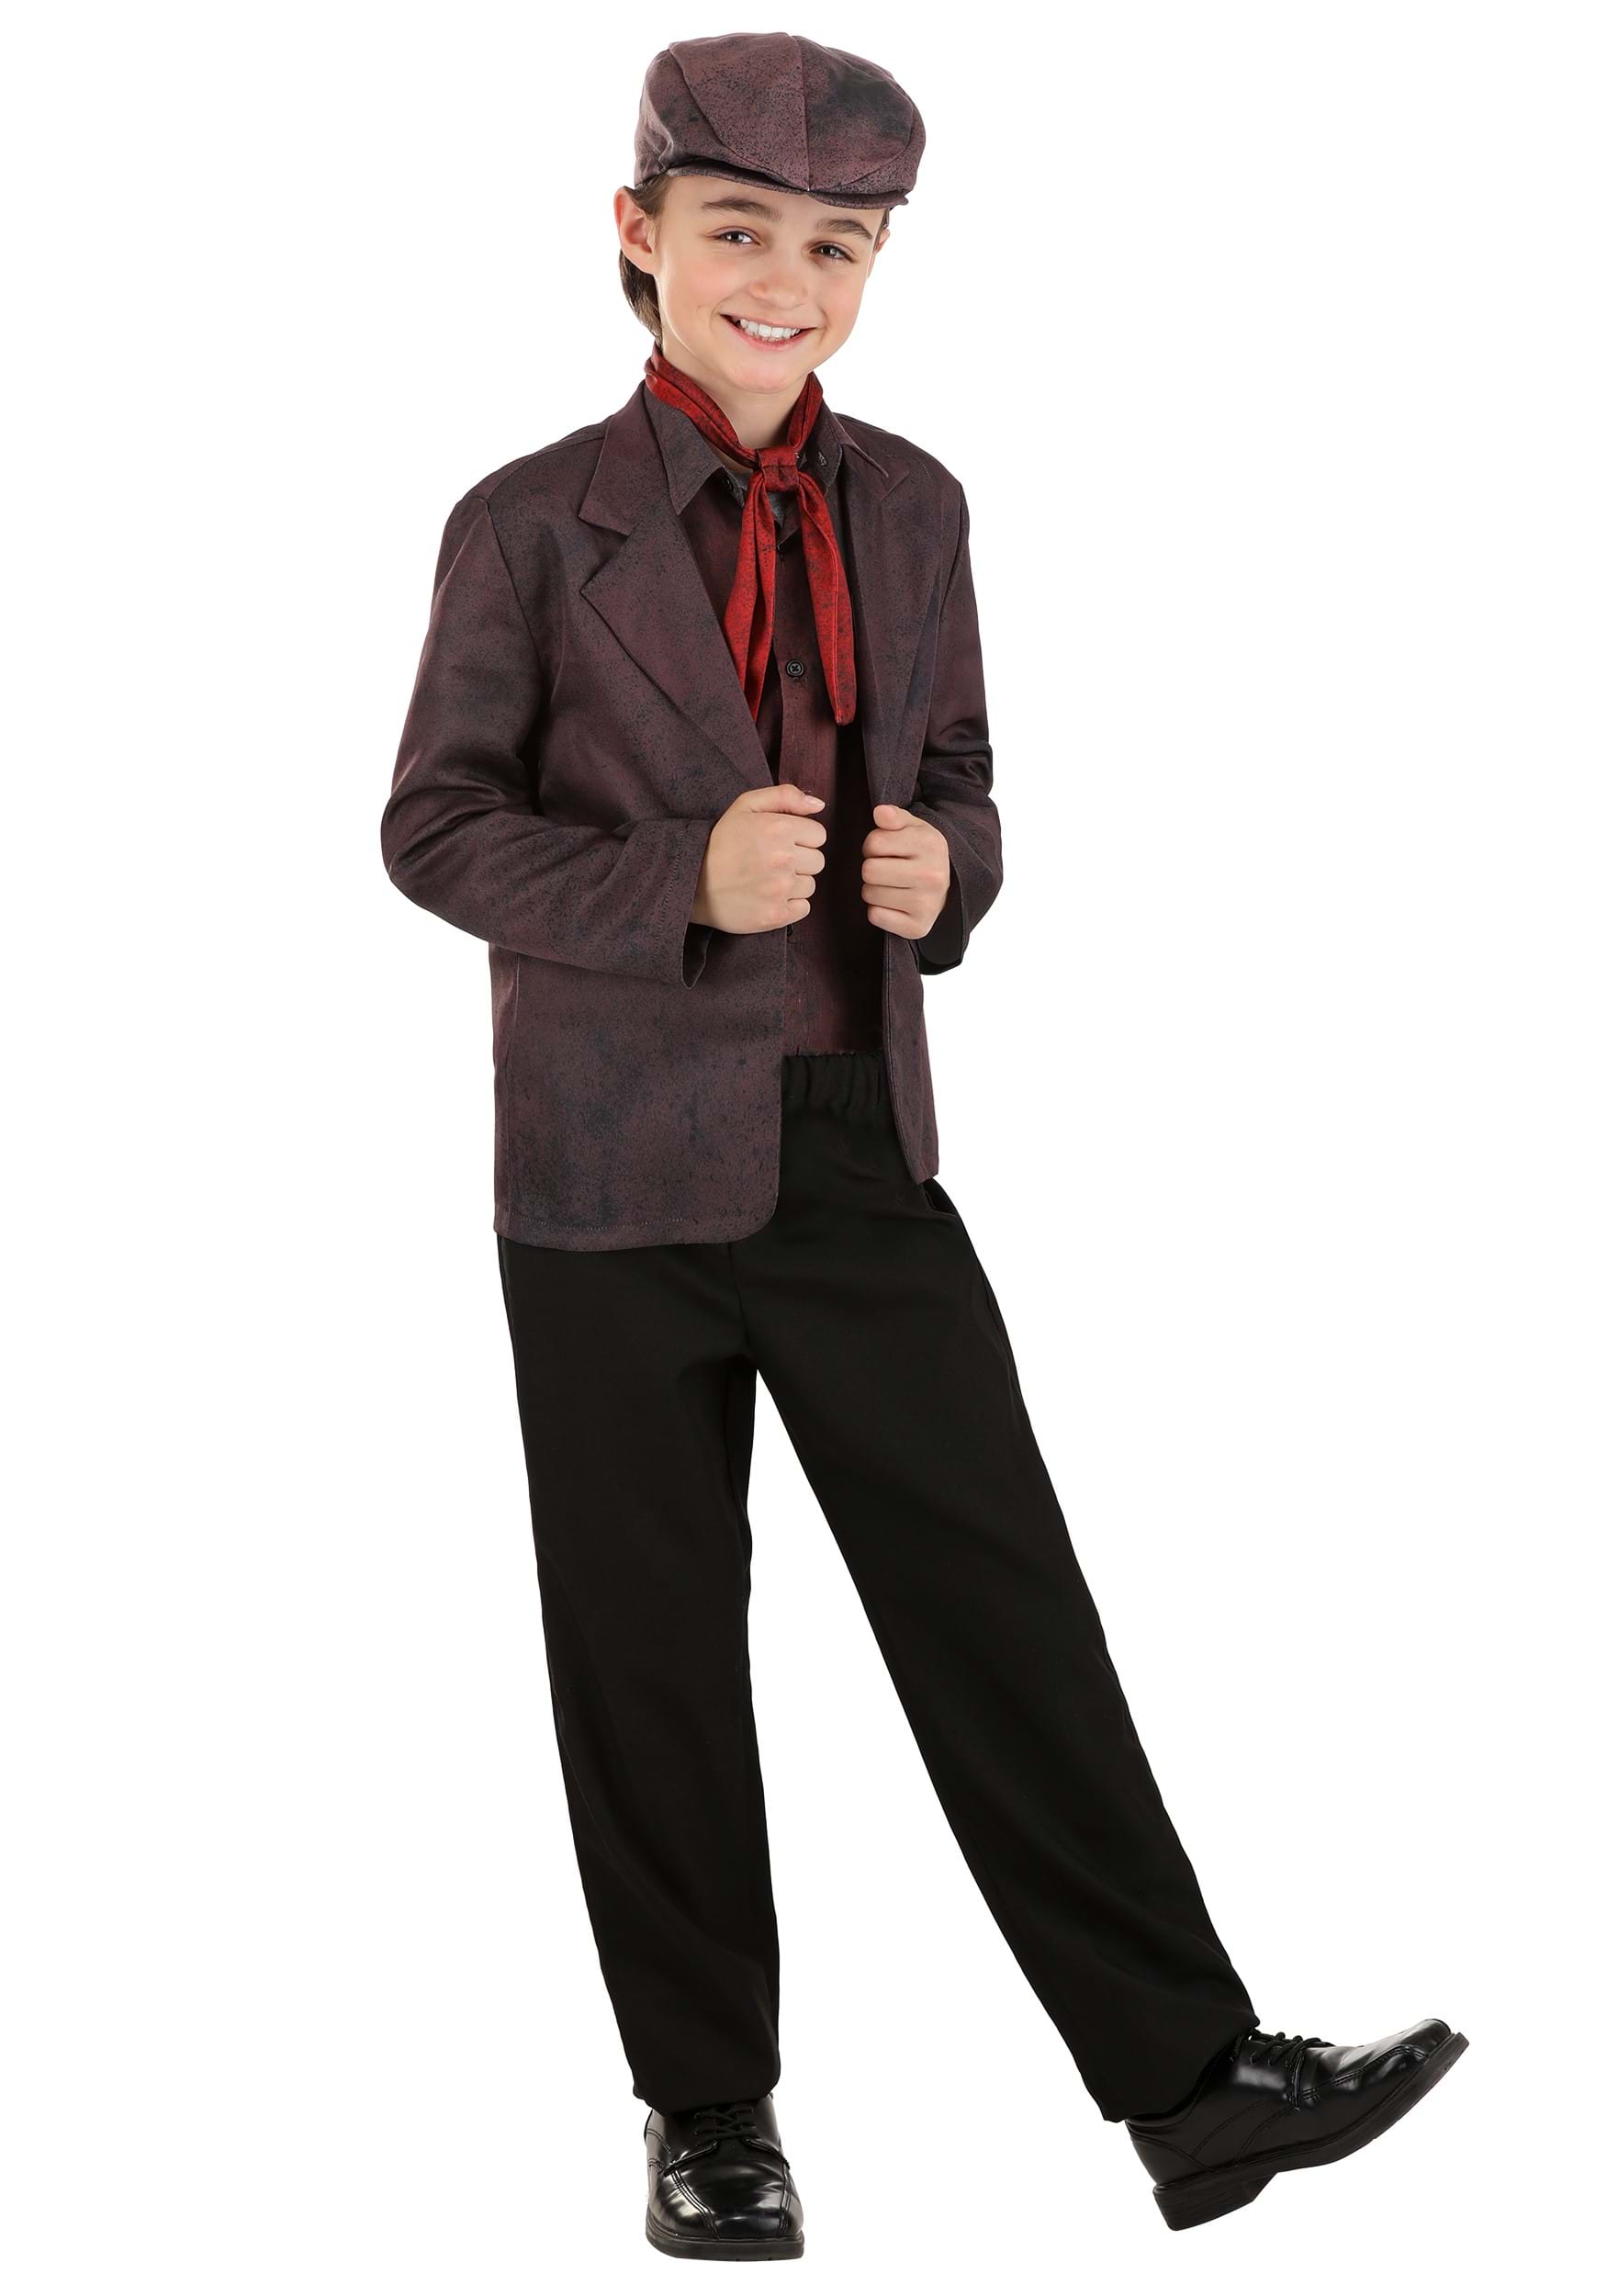 Photos - Fancy Dress Mary Poppins FUN Costumes  Bert Costume for Kids Brown FUN2808CH 